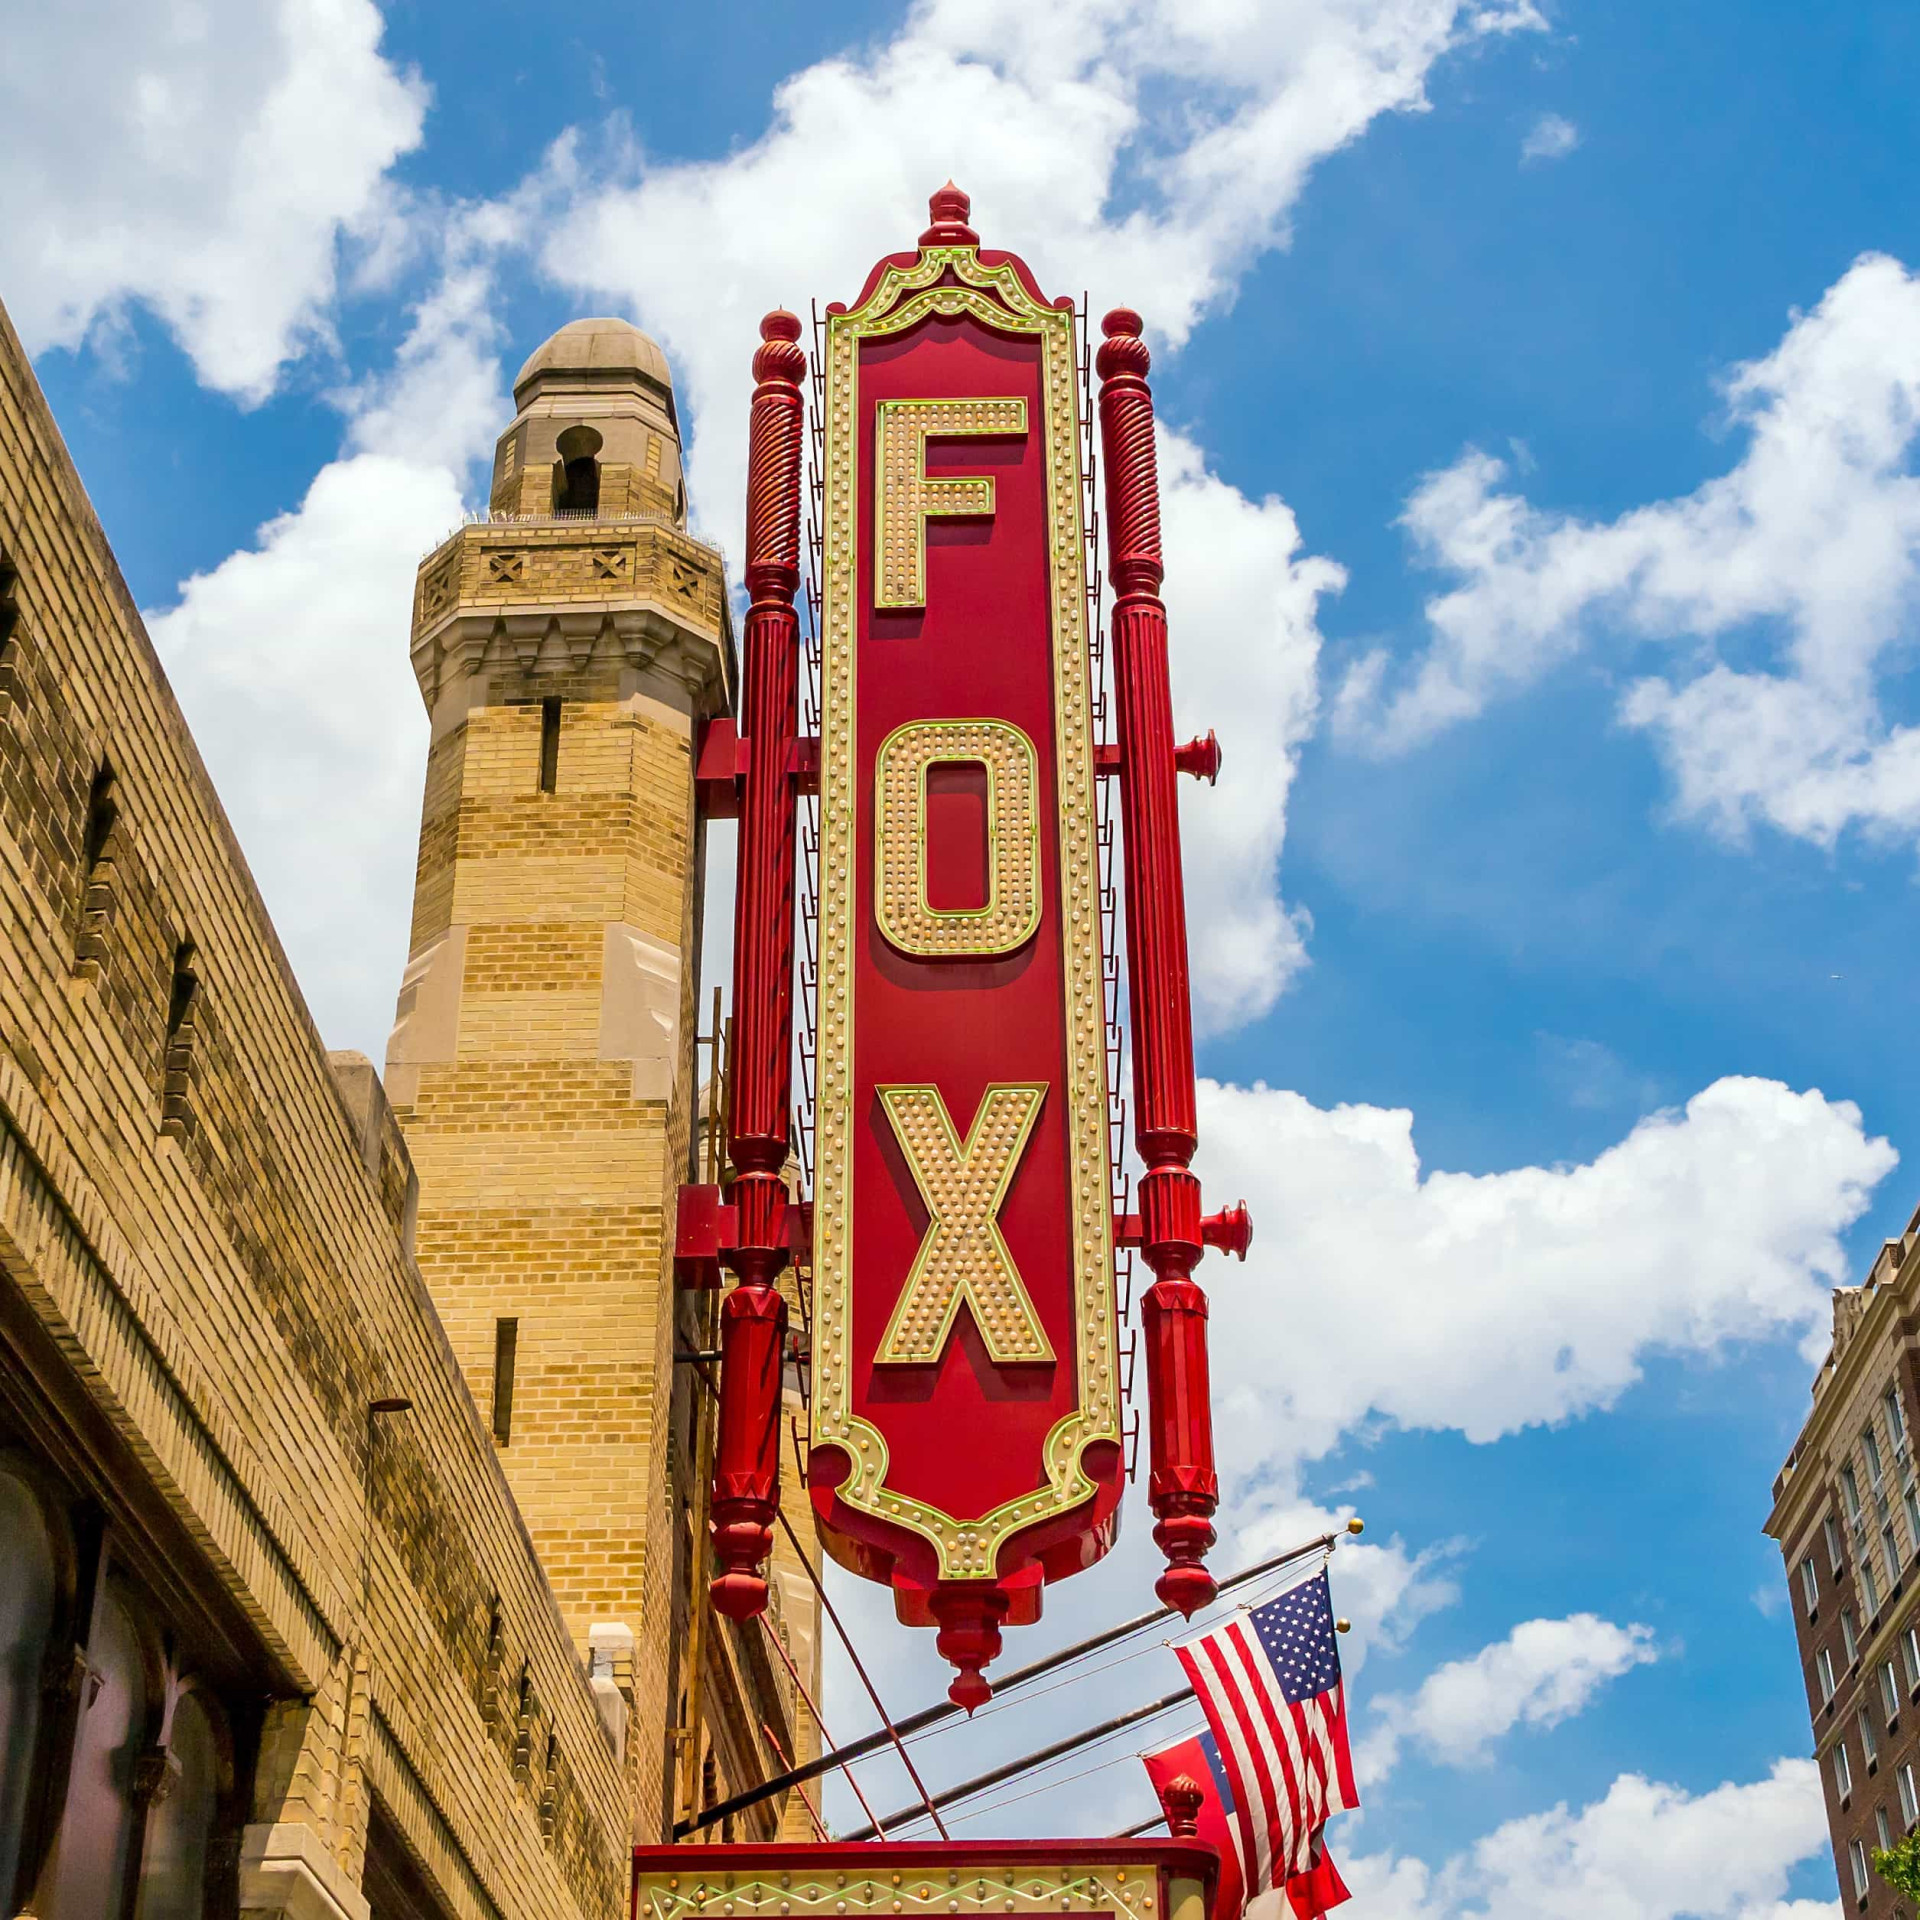 <p>Built in 1929, Atlanta's Fox Theater is a restored cinema that's been reborn as a thriving performing arts center. It's a National Historic Landmark, and worth a visit even if you just want to admire the 1920s grandeur of the lobby.</p><p><a href="https://www.msn.com/en-us/community/channel/vid-7xx8mnucu55yw63we9va2gwr7uihbxwc68fxqp25x6tg4ftibpra?cvid=94631541bc0f4f89bfd59158d696ad7e">Follow us and access great exclusive content every day</a></p>